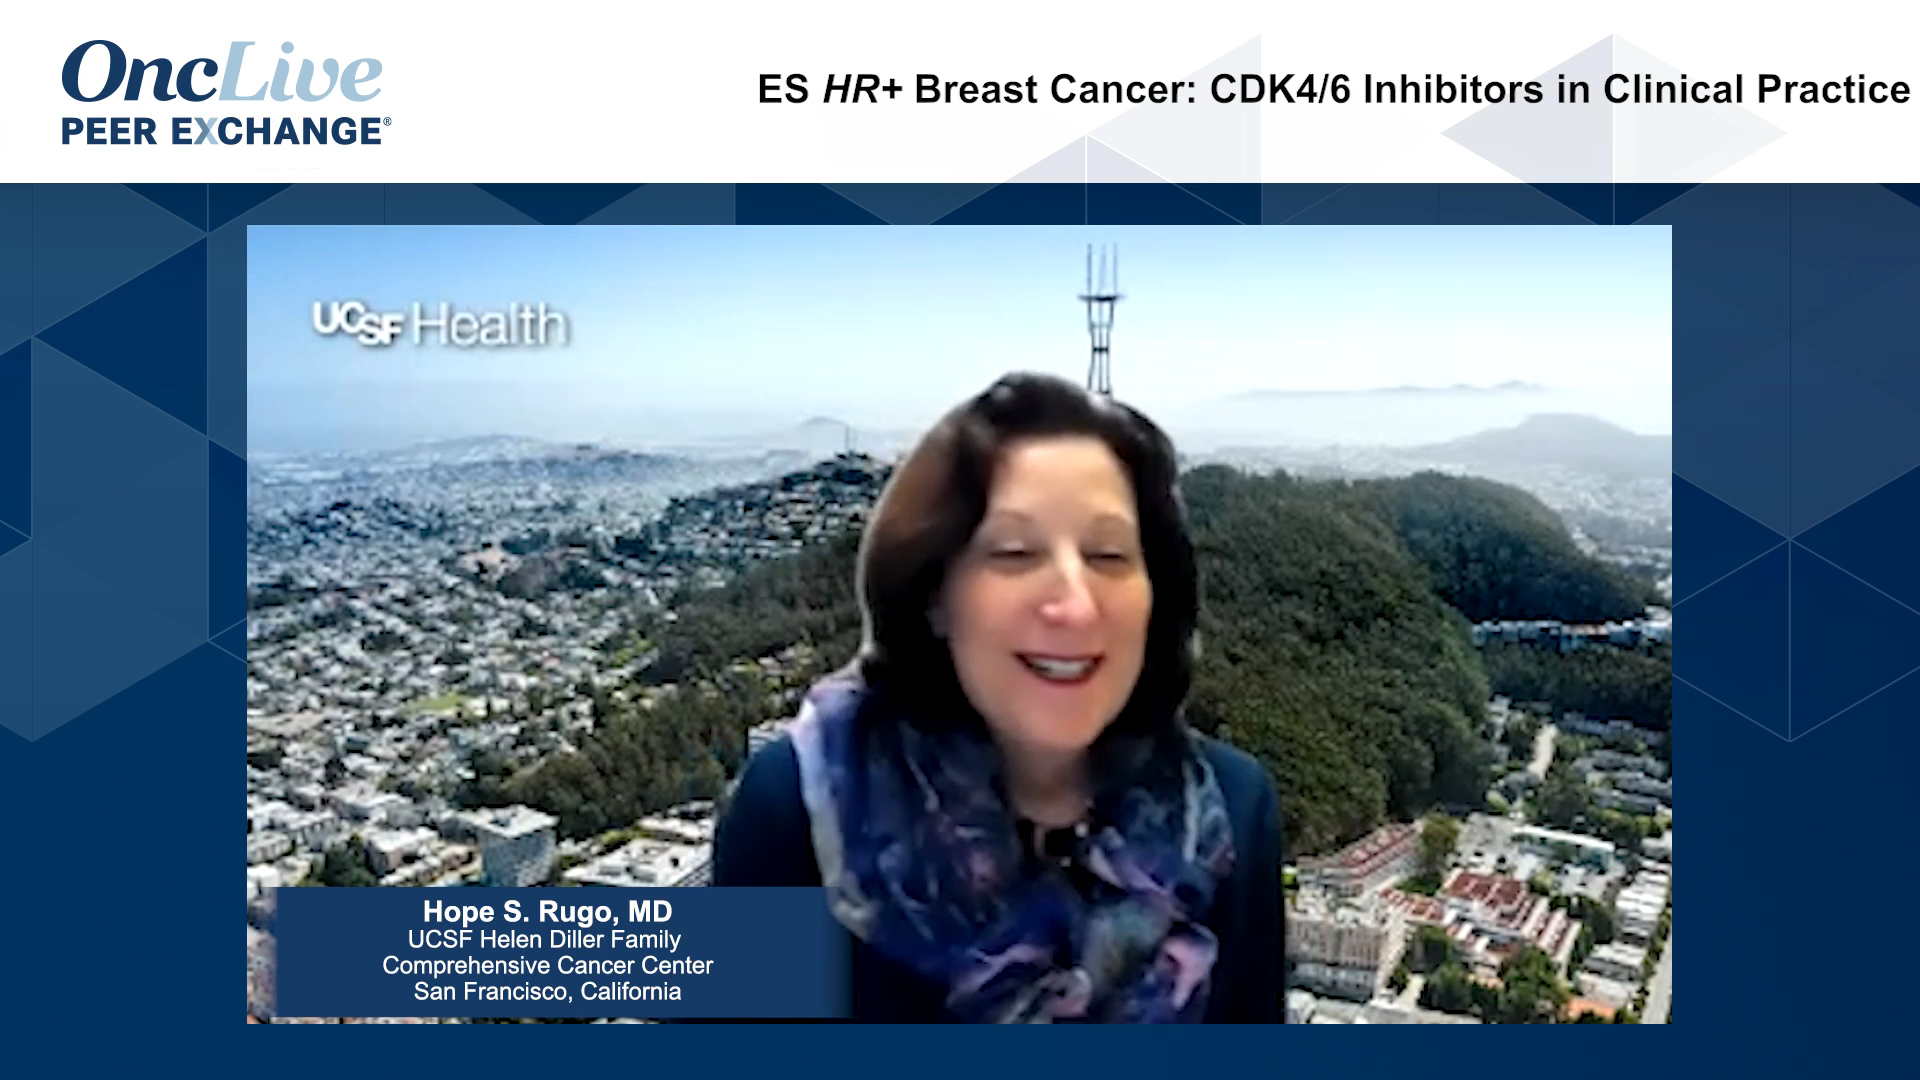 ES HR+ Breast Cancer: CDK4/6 Inhibitors in Clinical Practice